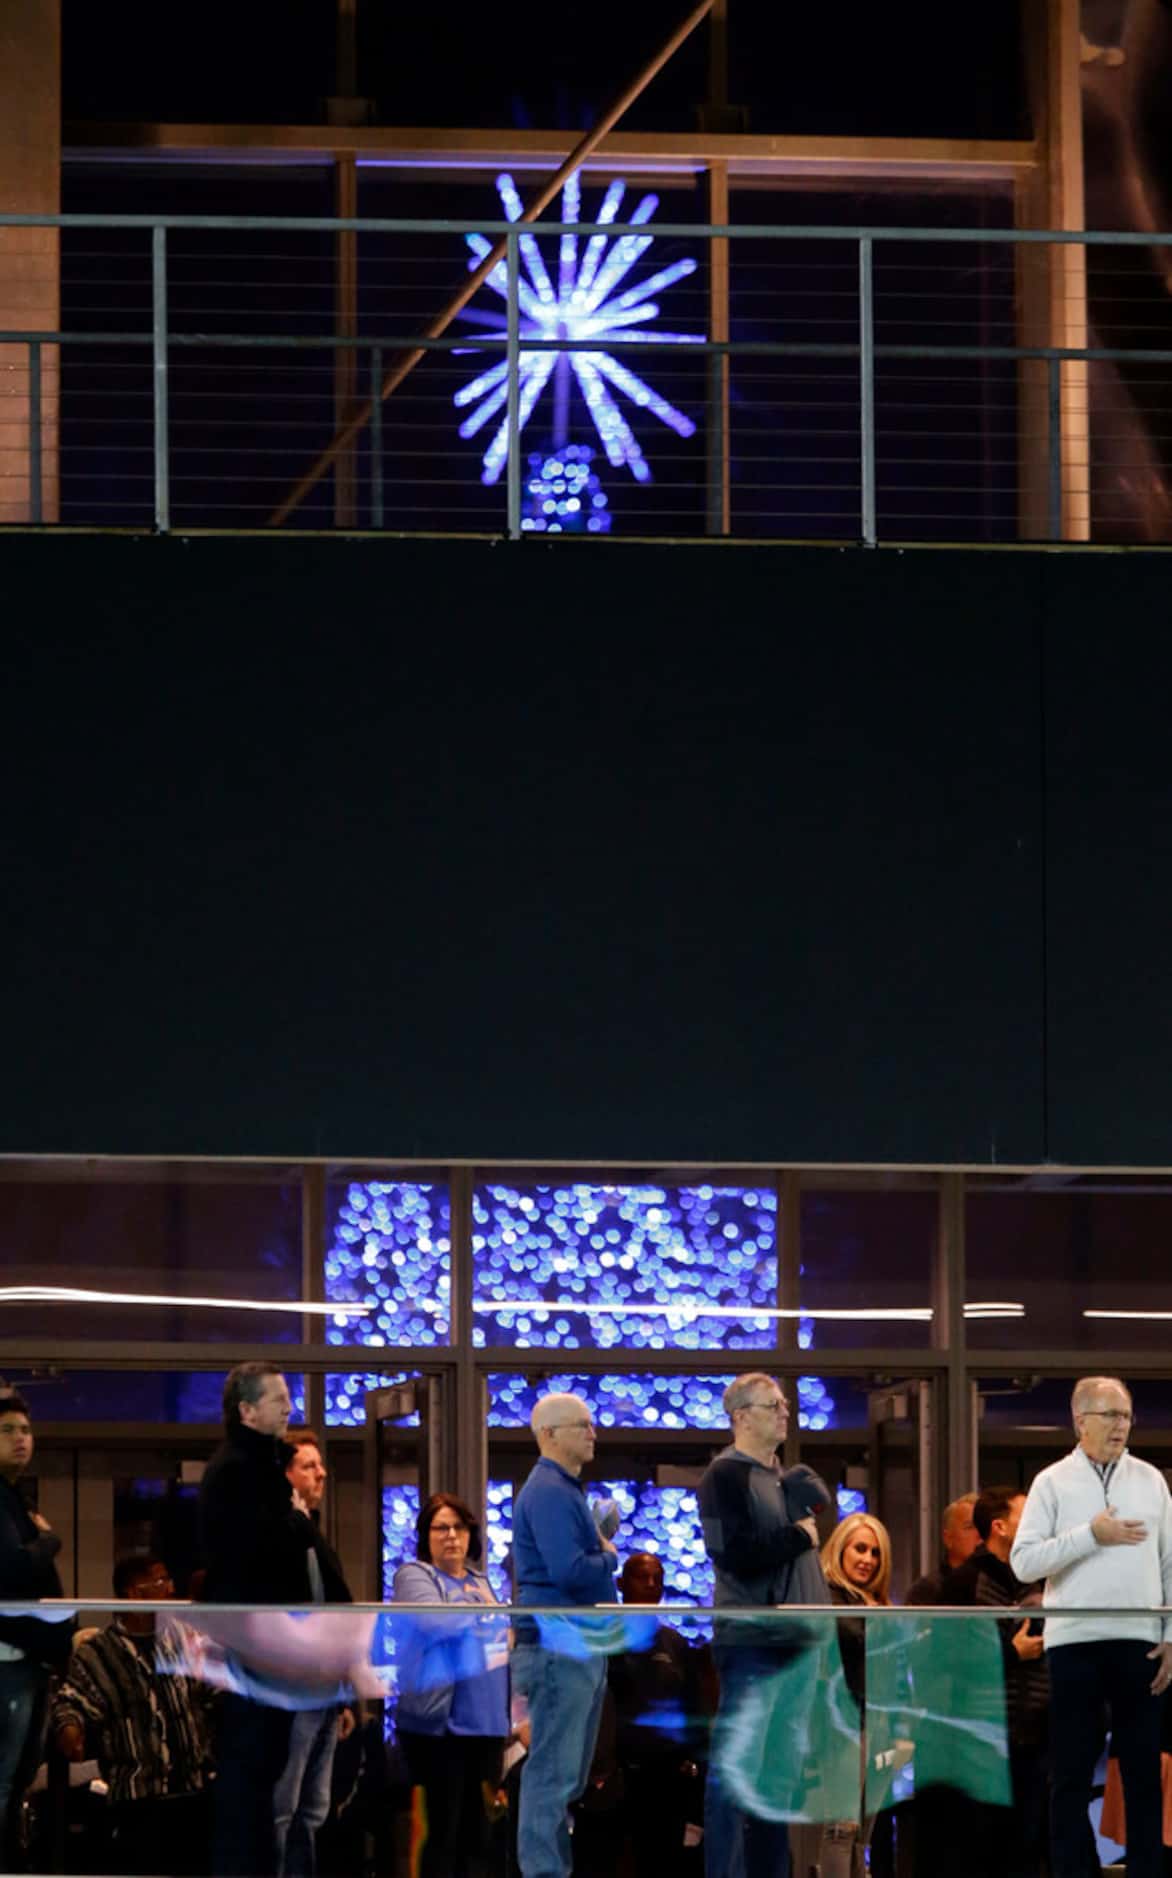 The Star Centre's giant Christmas tree can be seen through the Ford Center's window, as fans...